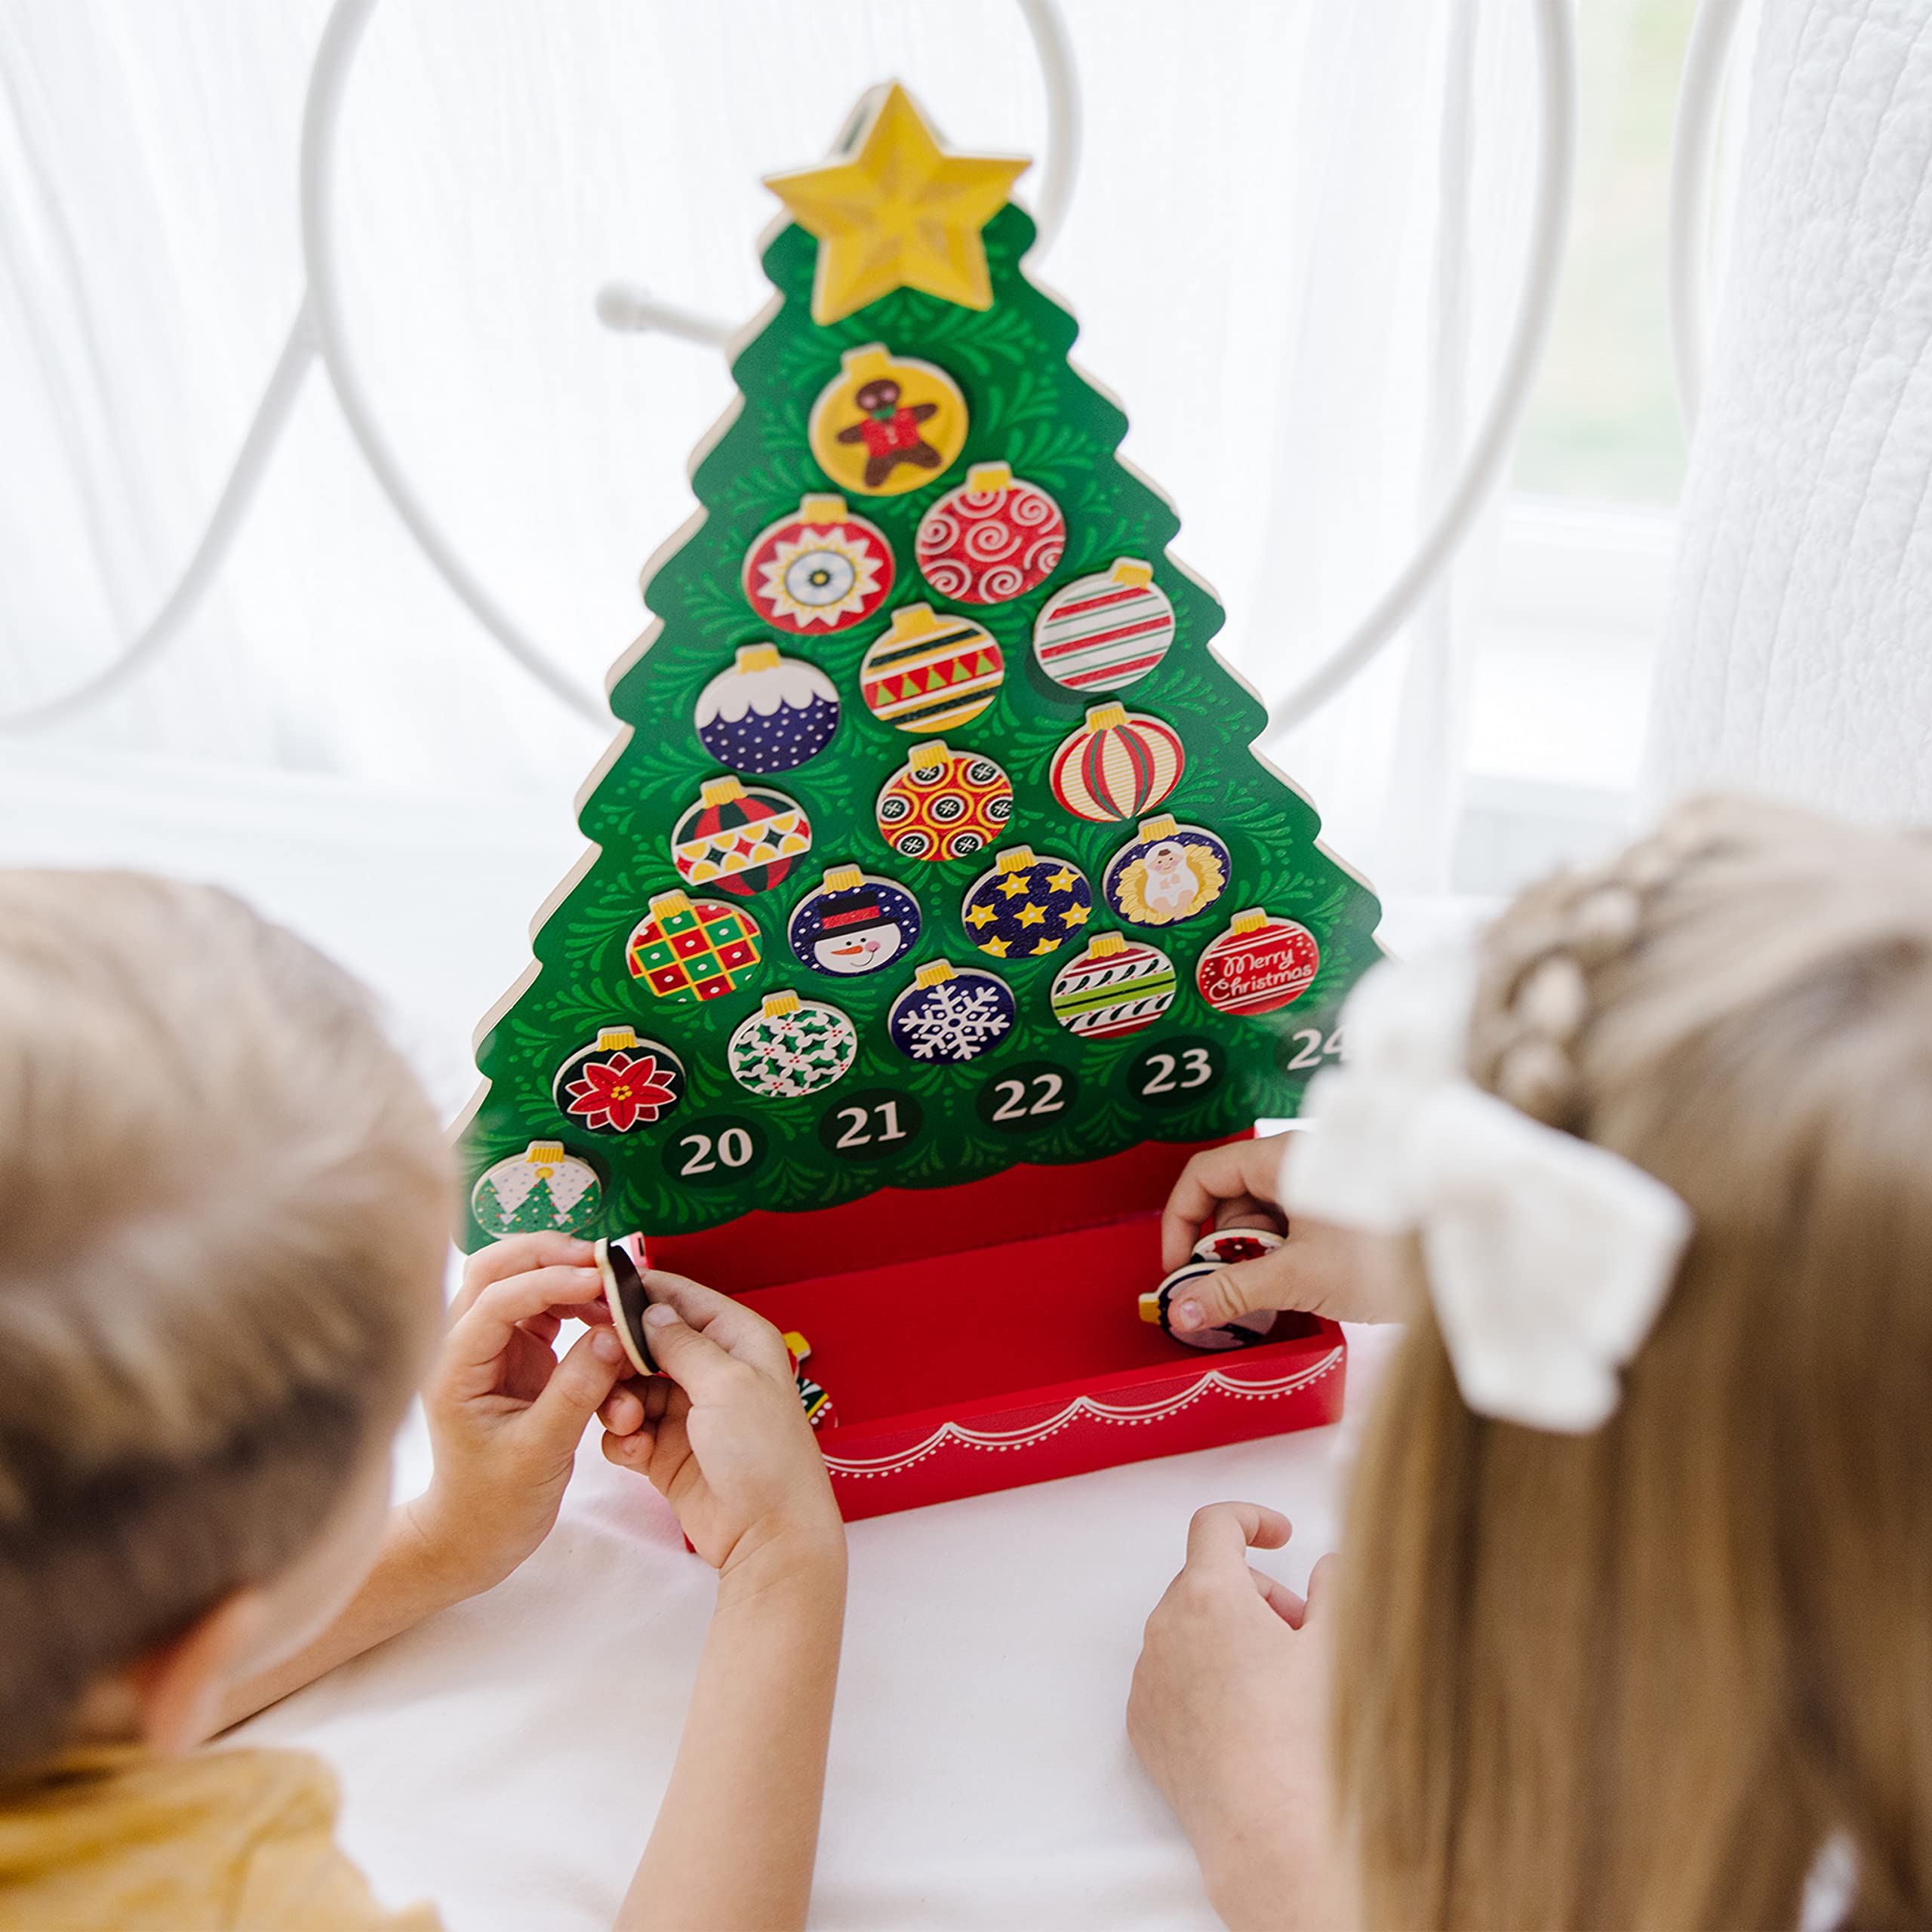 Melissa & Doug Wooden Advent Calendar - Magnetic Christmas Tree, 25 Magnets - Holiday Tree Themed Countdown Style Toddler and Kid Advent Calendar 2022 For Ages 3+